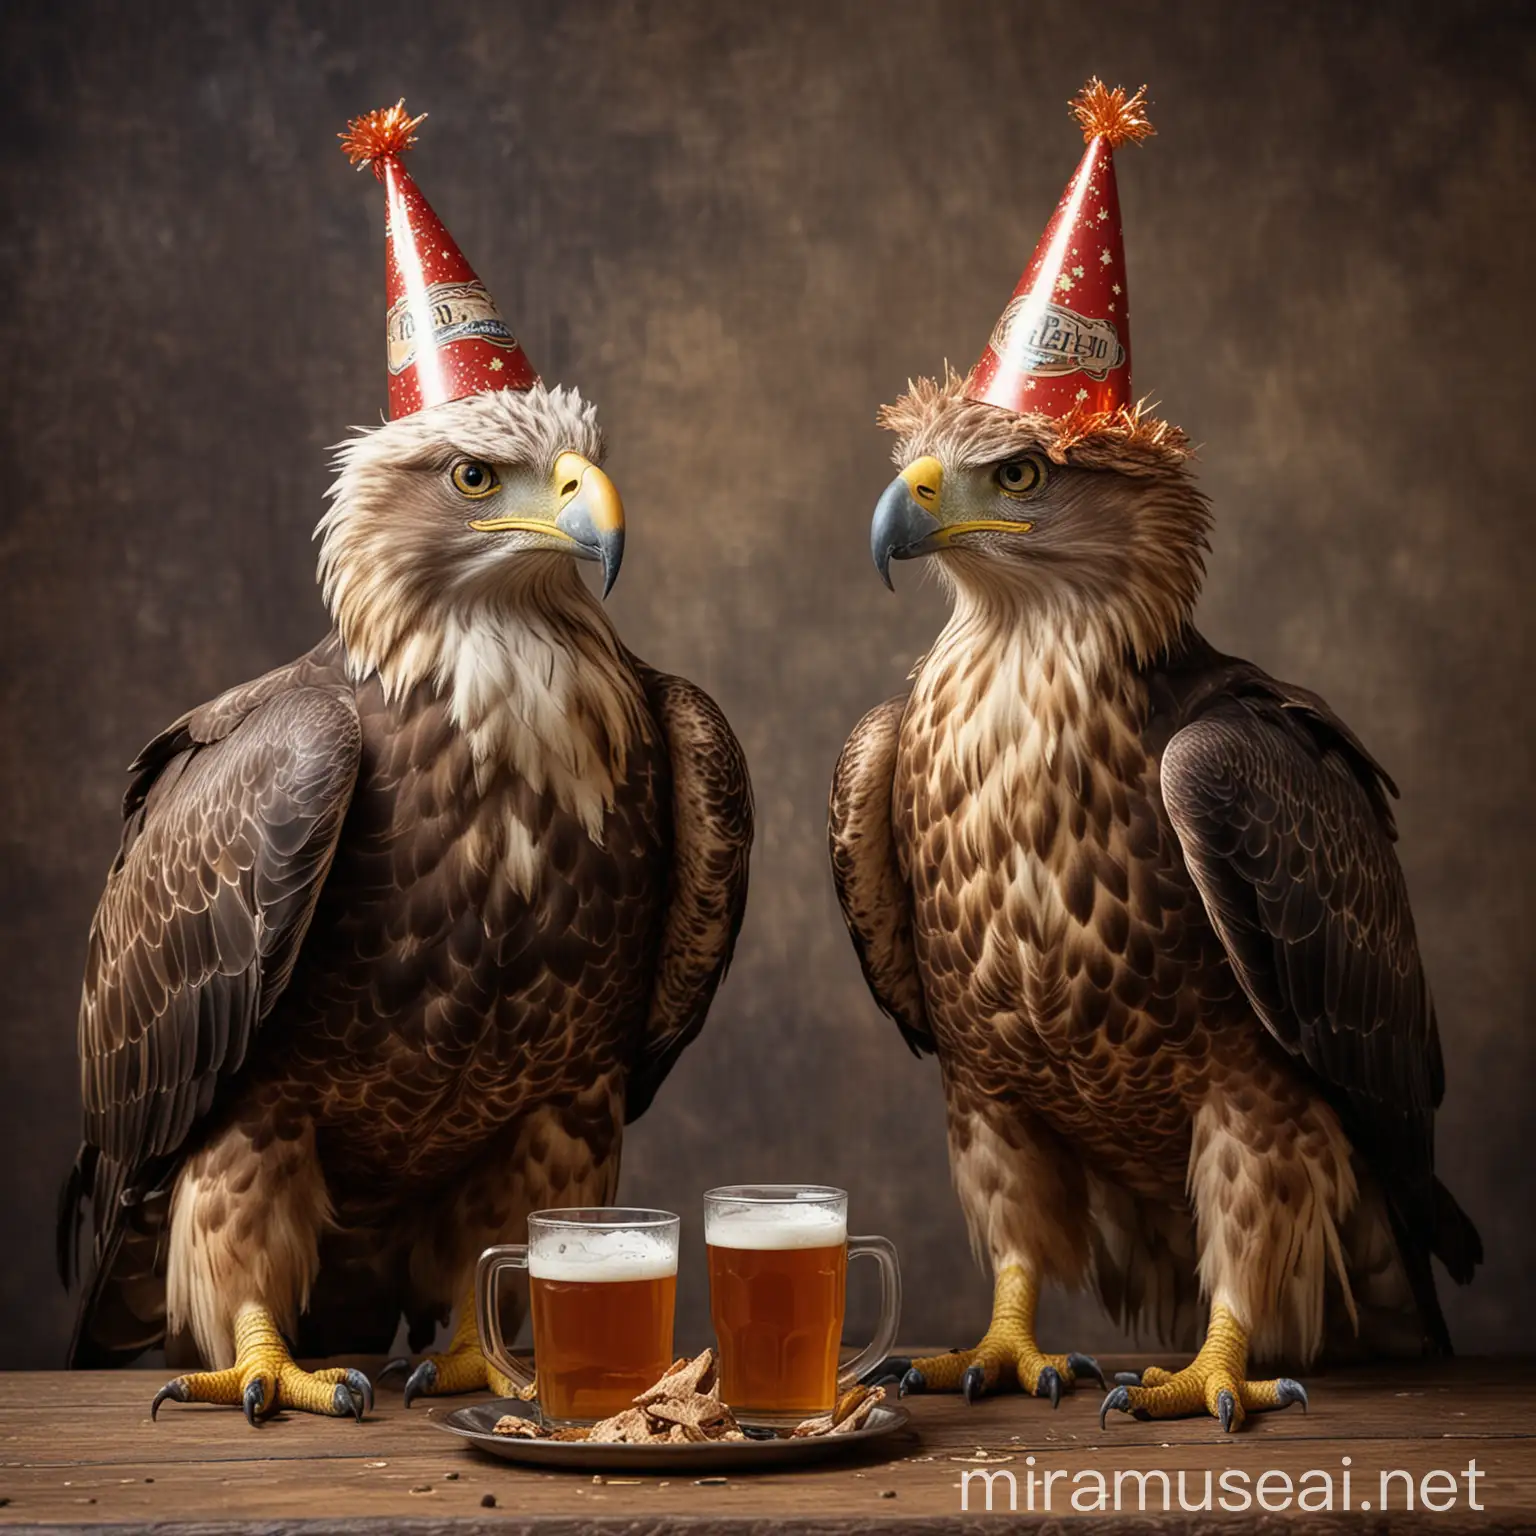 Birthday of the old eagle and mature hawk in festive party hats and with beer